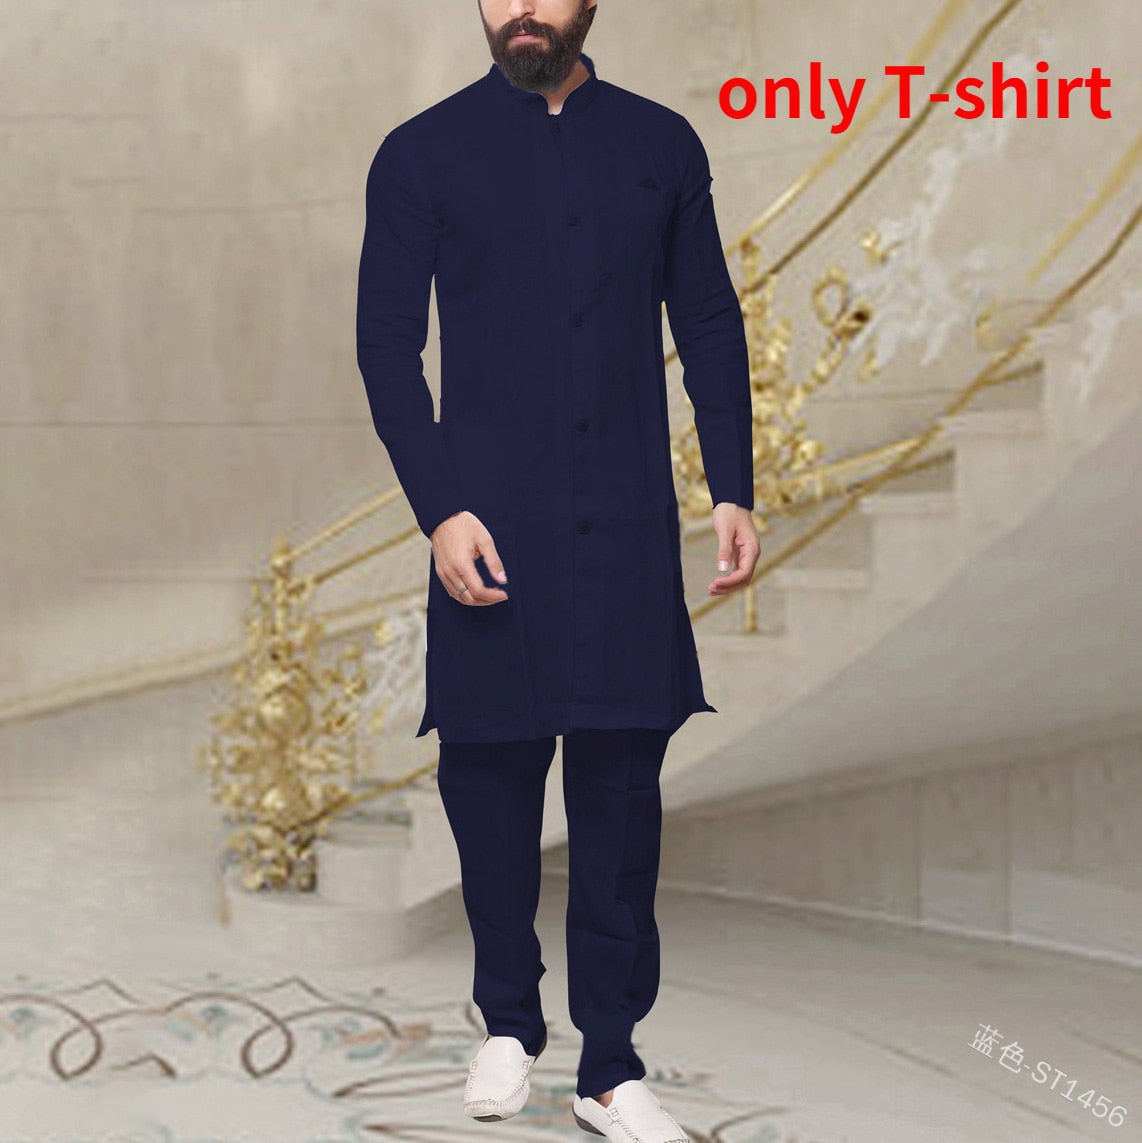 Men Fashion African Clothes Cotton T-shirt Dubai Muslim Long Sleeve Tee Tops Islamic Clothing Set Arabic Casual Blouse Robe Gown voguable